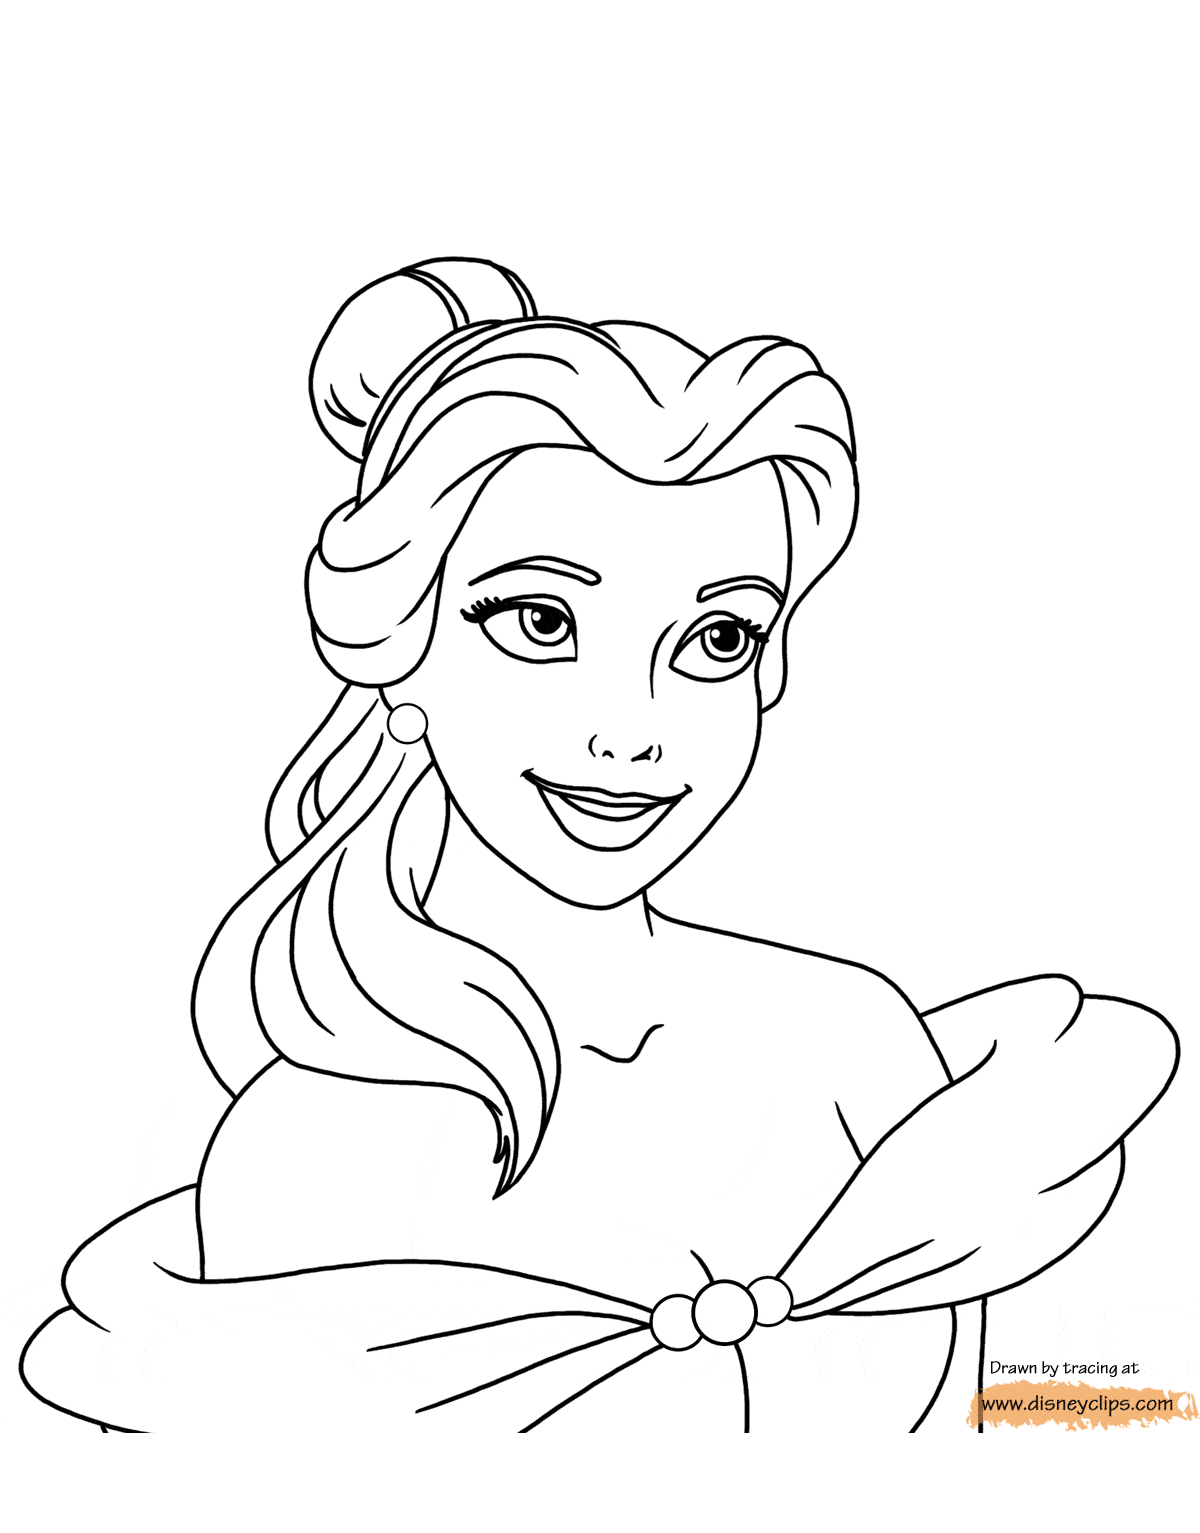 Download Beauty and the Beast Coloring Pages (3) | Disneyclips.com